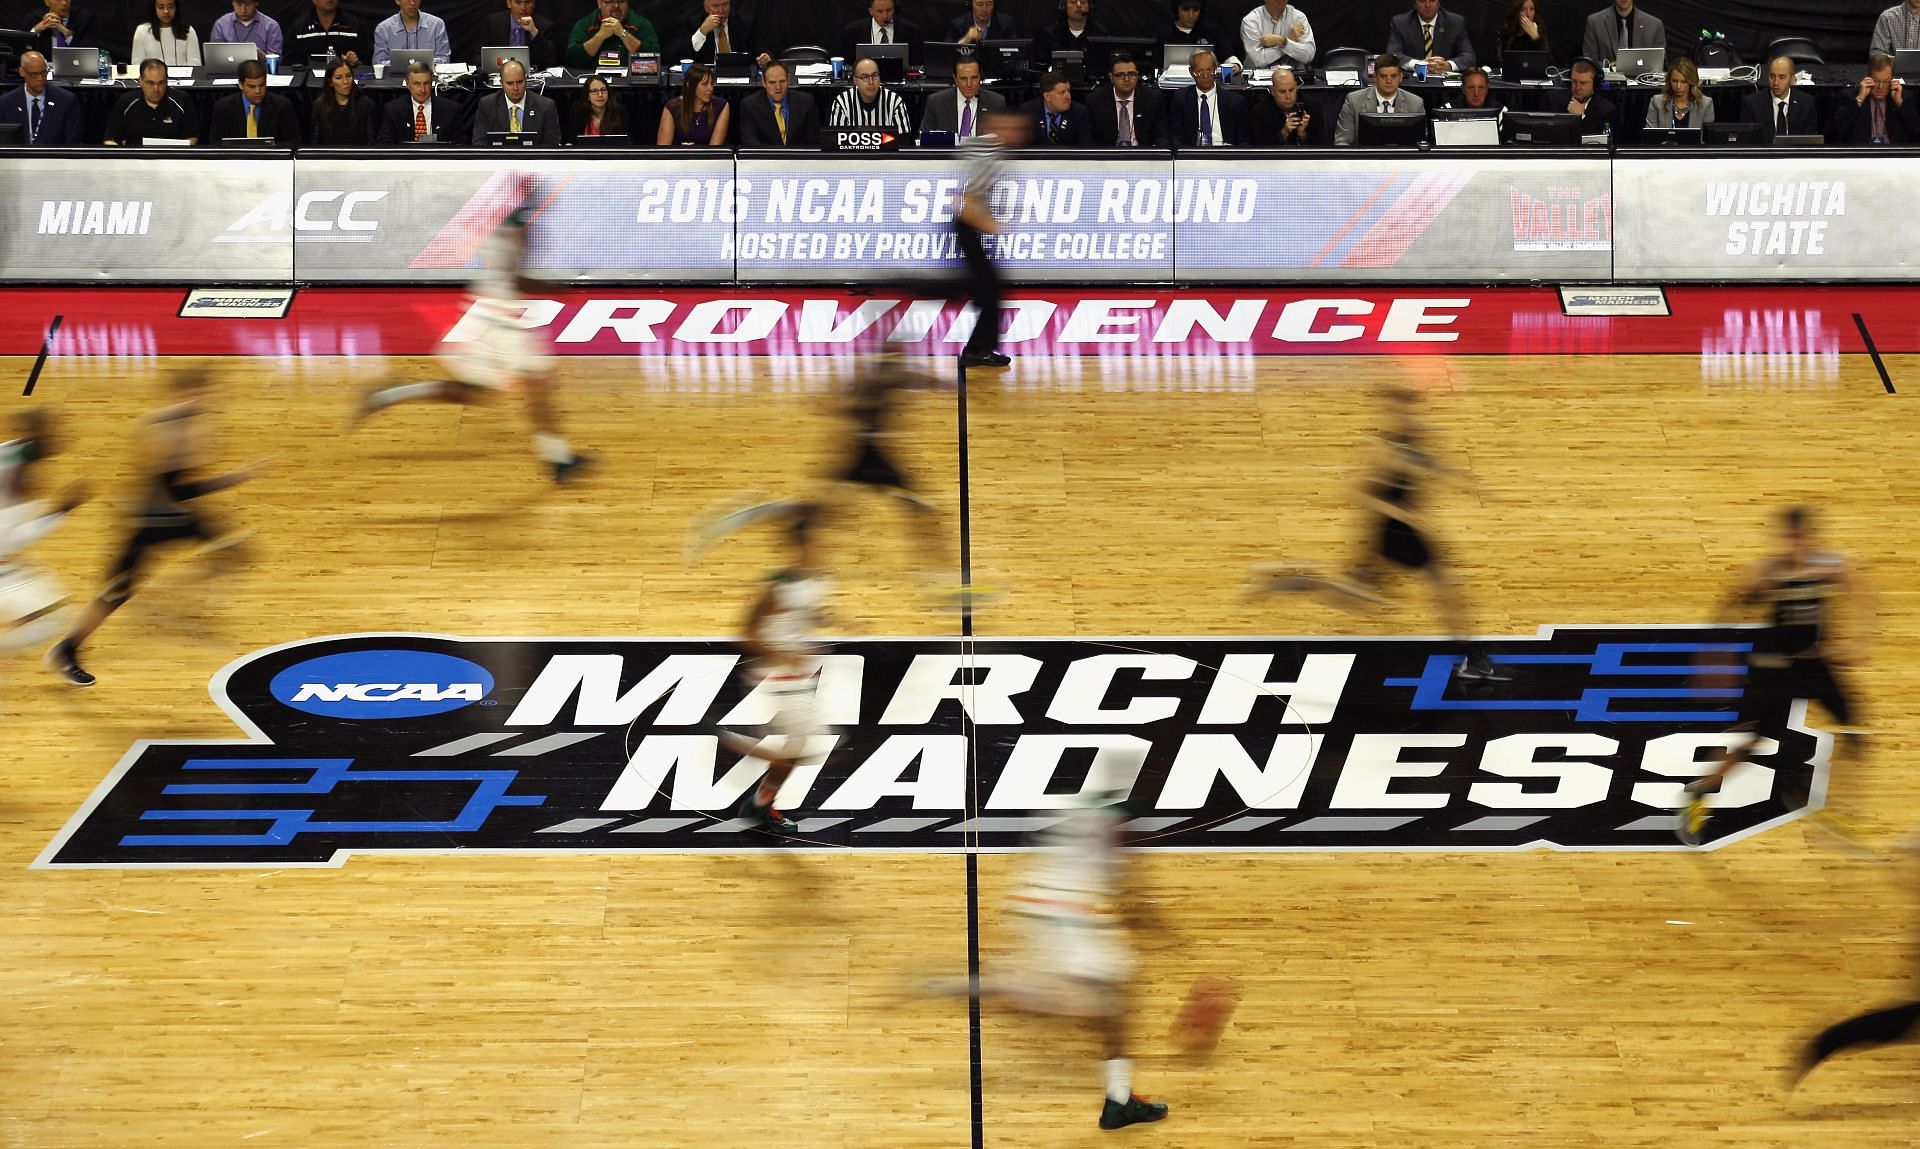 NIT vs March Madness Detailed comparison of postseason college